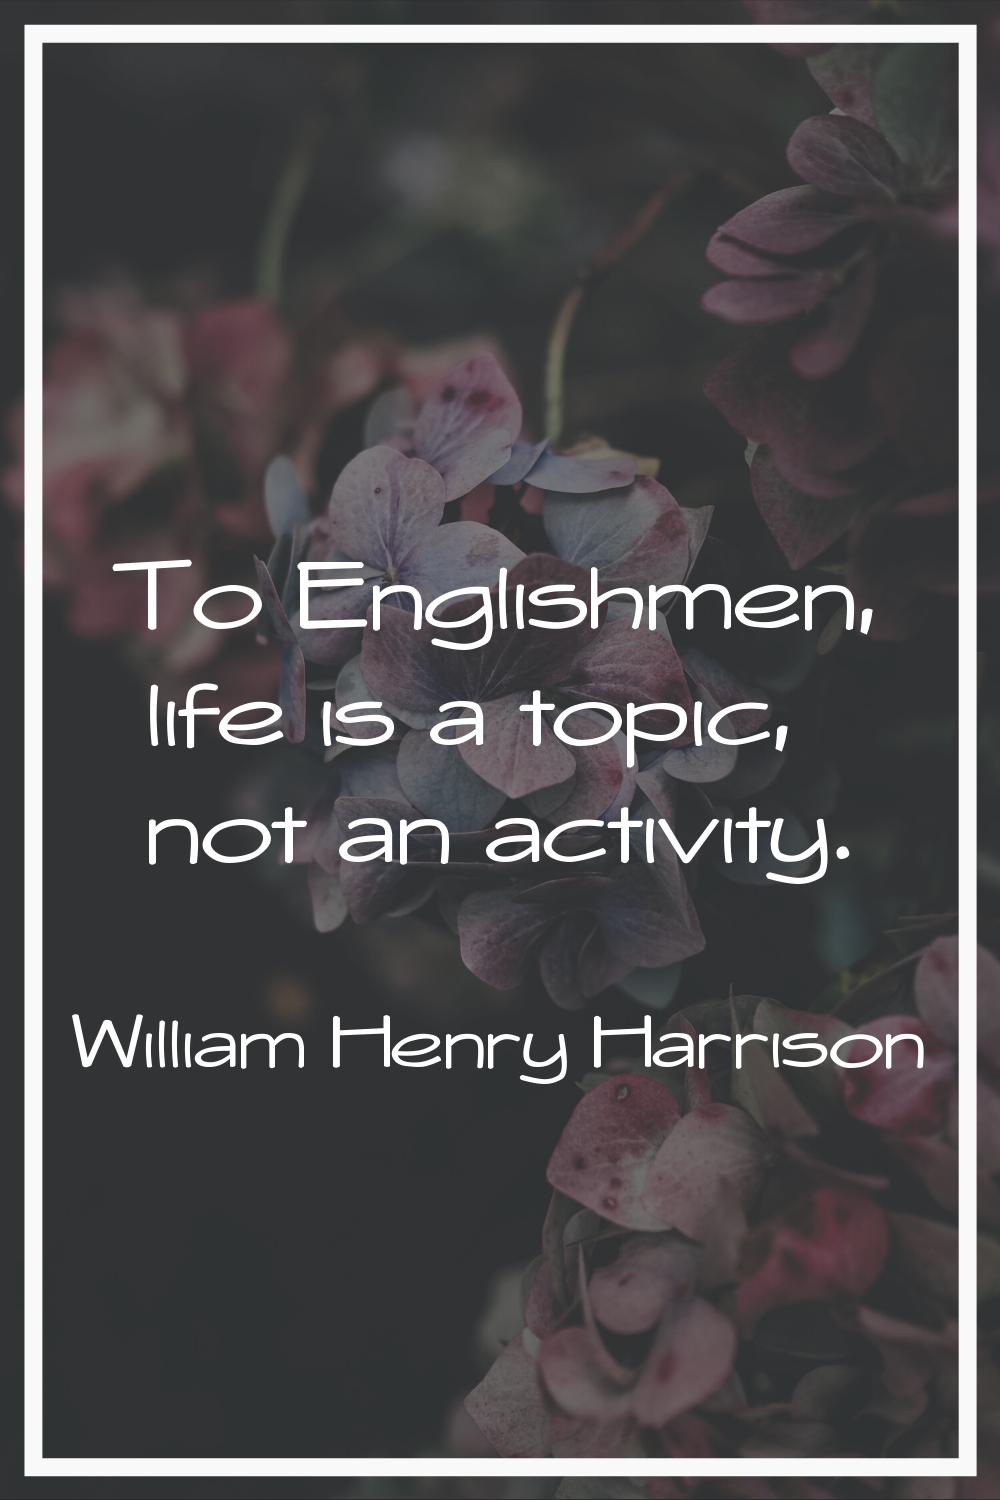 To Englishmen, life is a topic, not an activity.